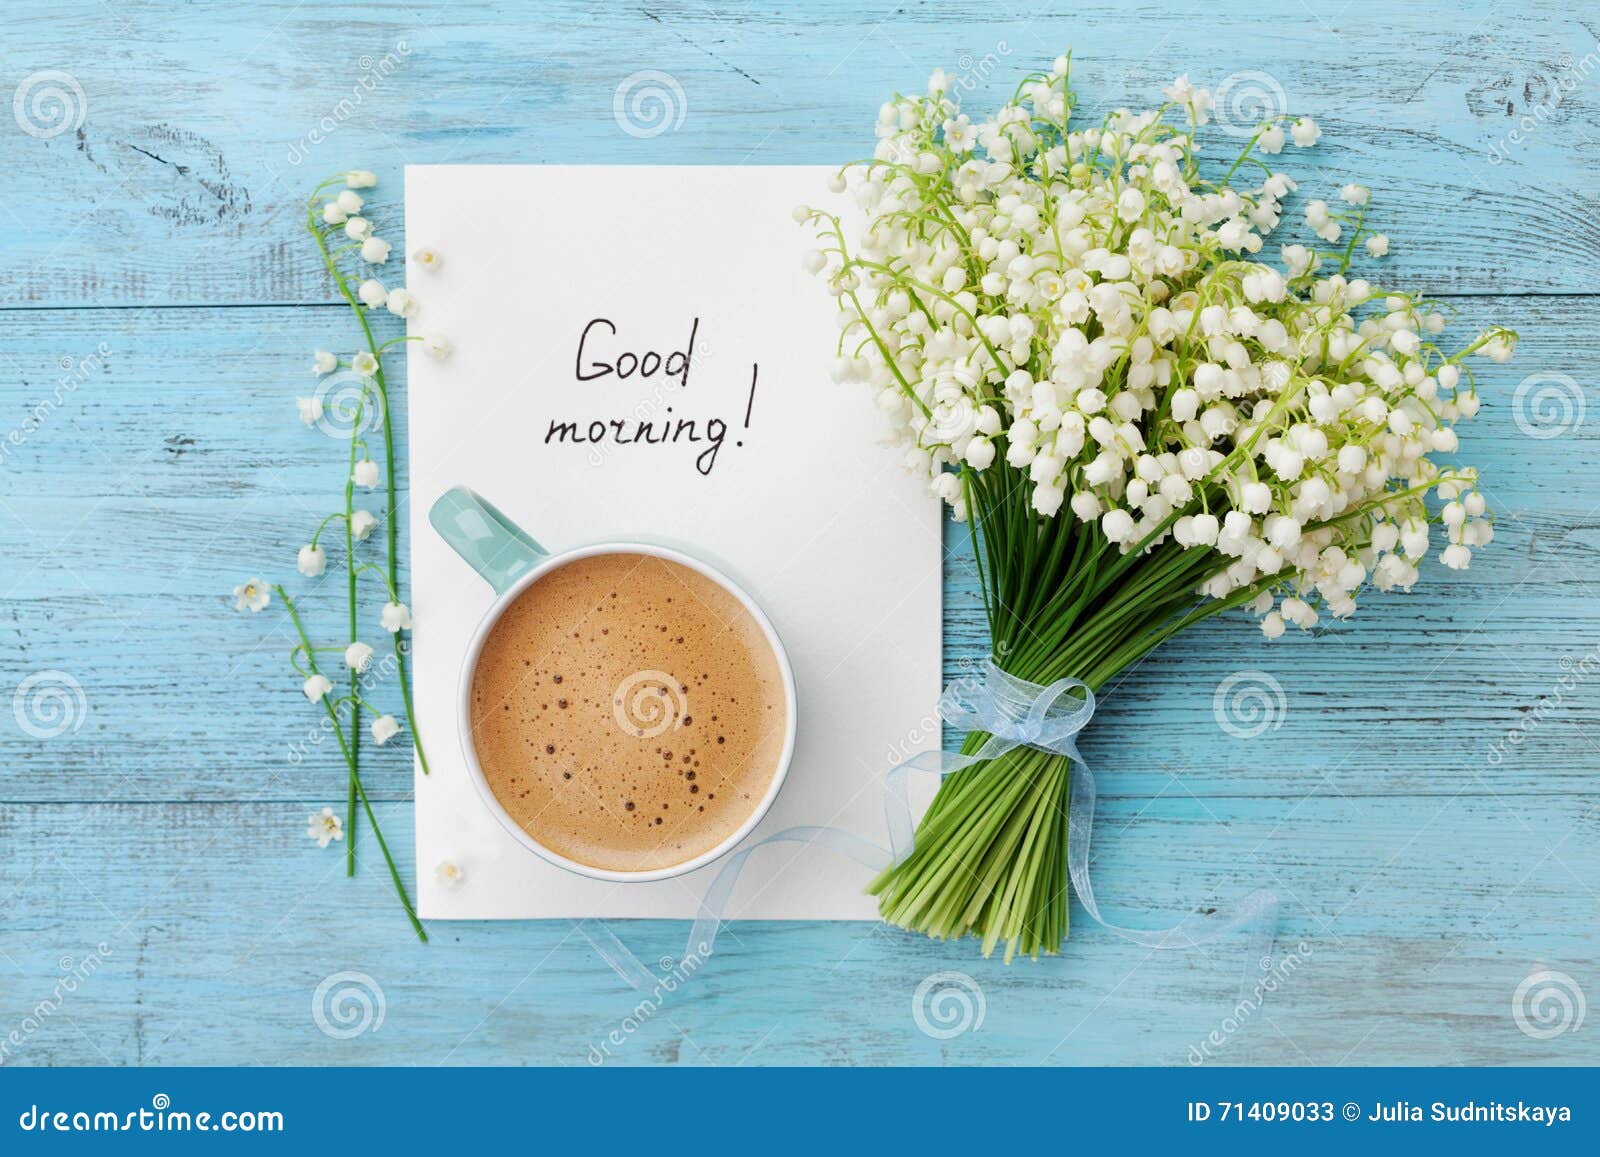 coffee mug with bouquet of flowers lily of the valley and notes good morning on turquoise rustic table from above